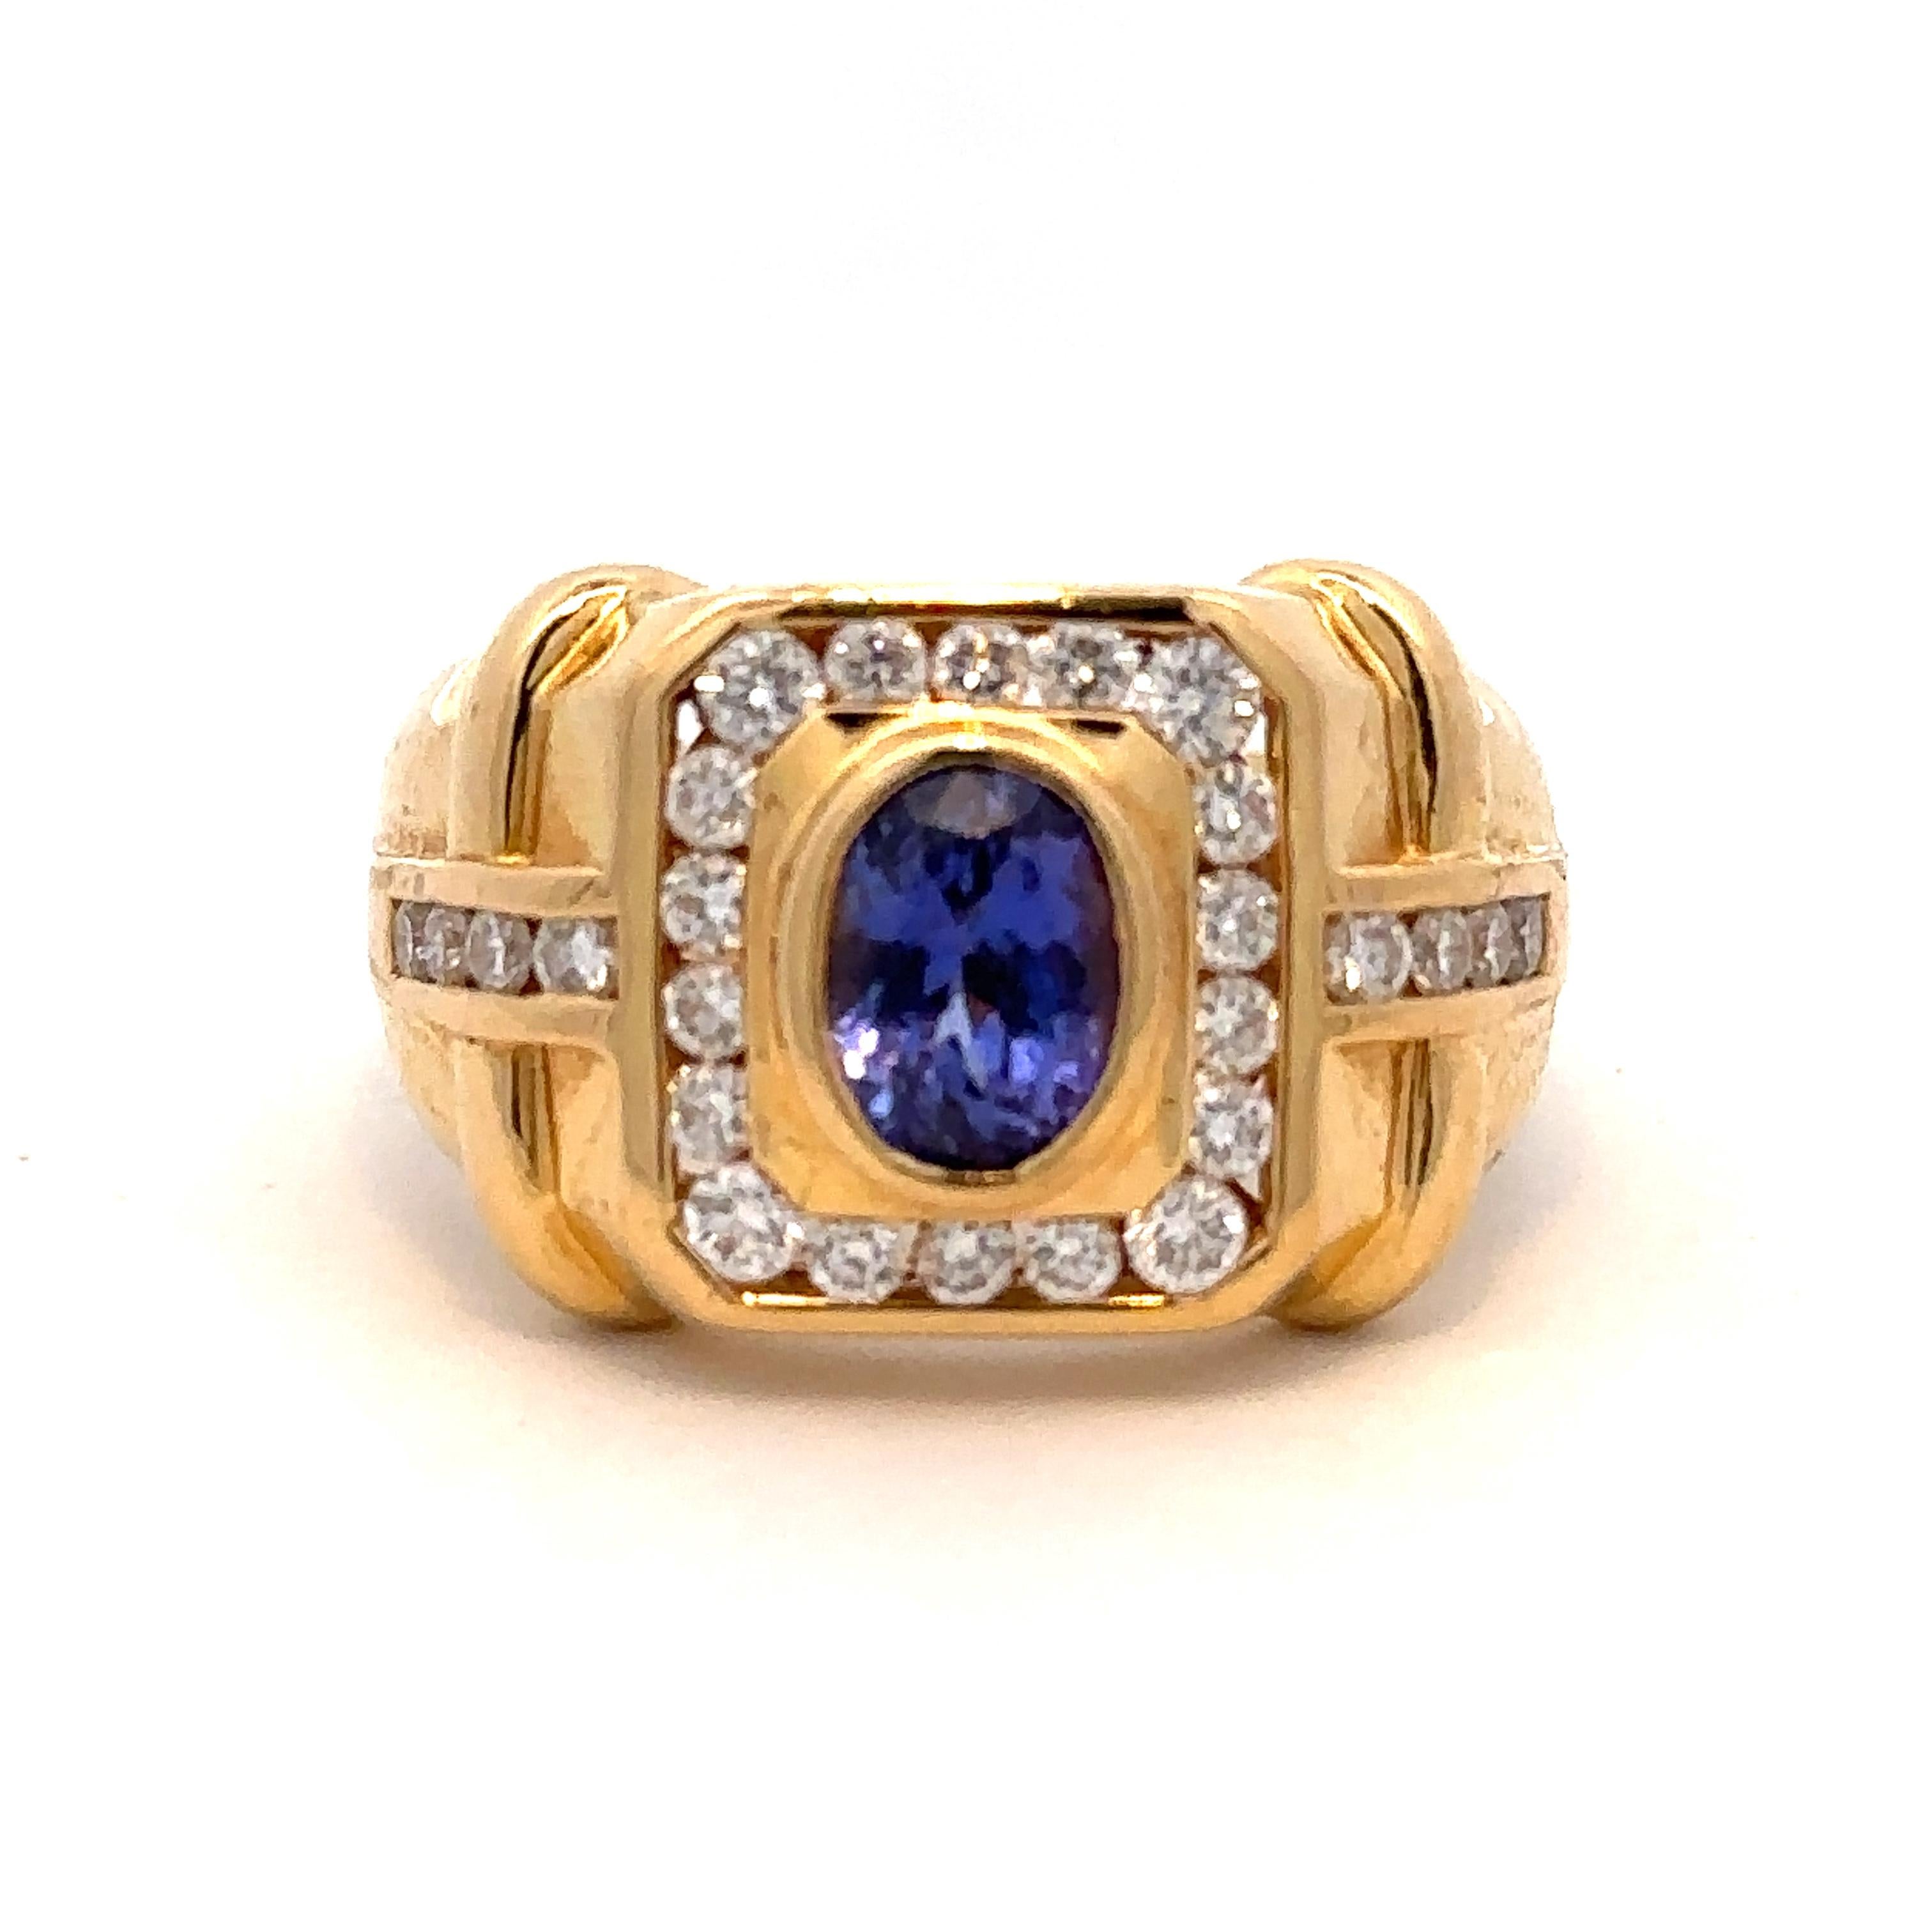 An incredible modern setting of a rich-colored tanzanite within diamonds in an 18k yellow gold ring, size 9.75 (sizeable). The tanzanite is approximately 1.5 cts and the diamonds weigh approximately 0.56 ctw (all measurements taken in setting). 